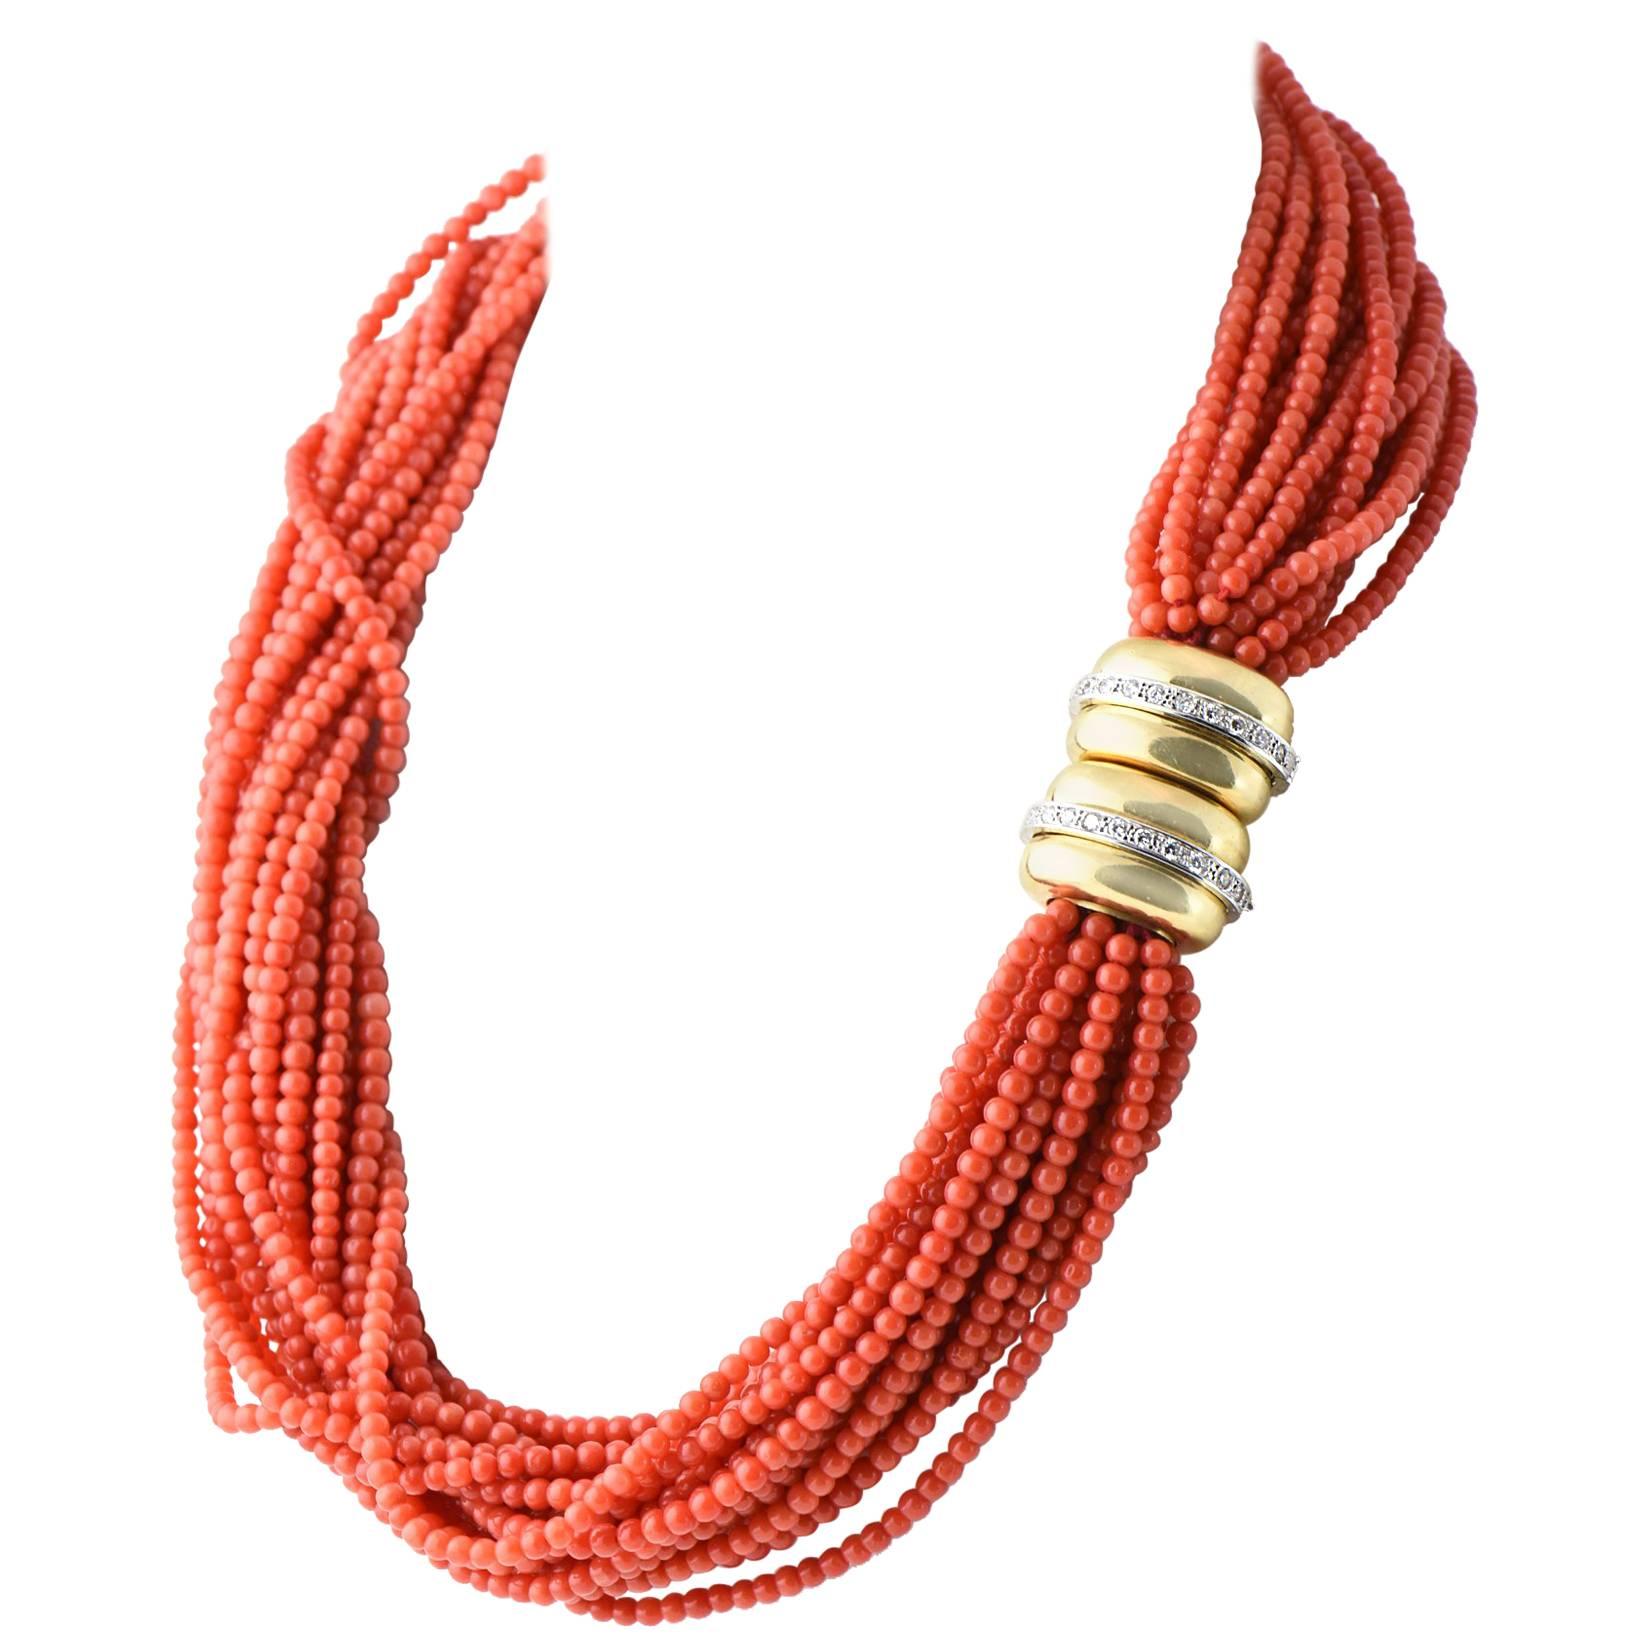 Multistrand Coral Bead Necklace with Diamond Gold Clasp Removable Enhancers